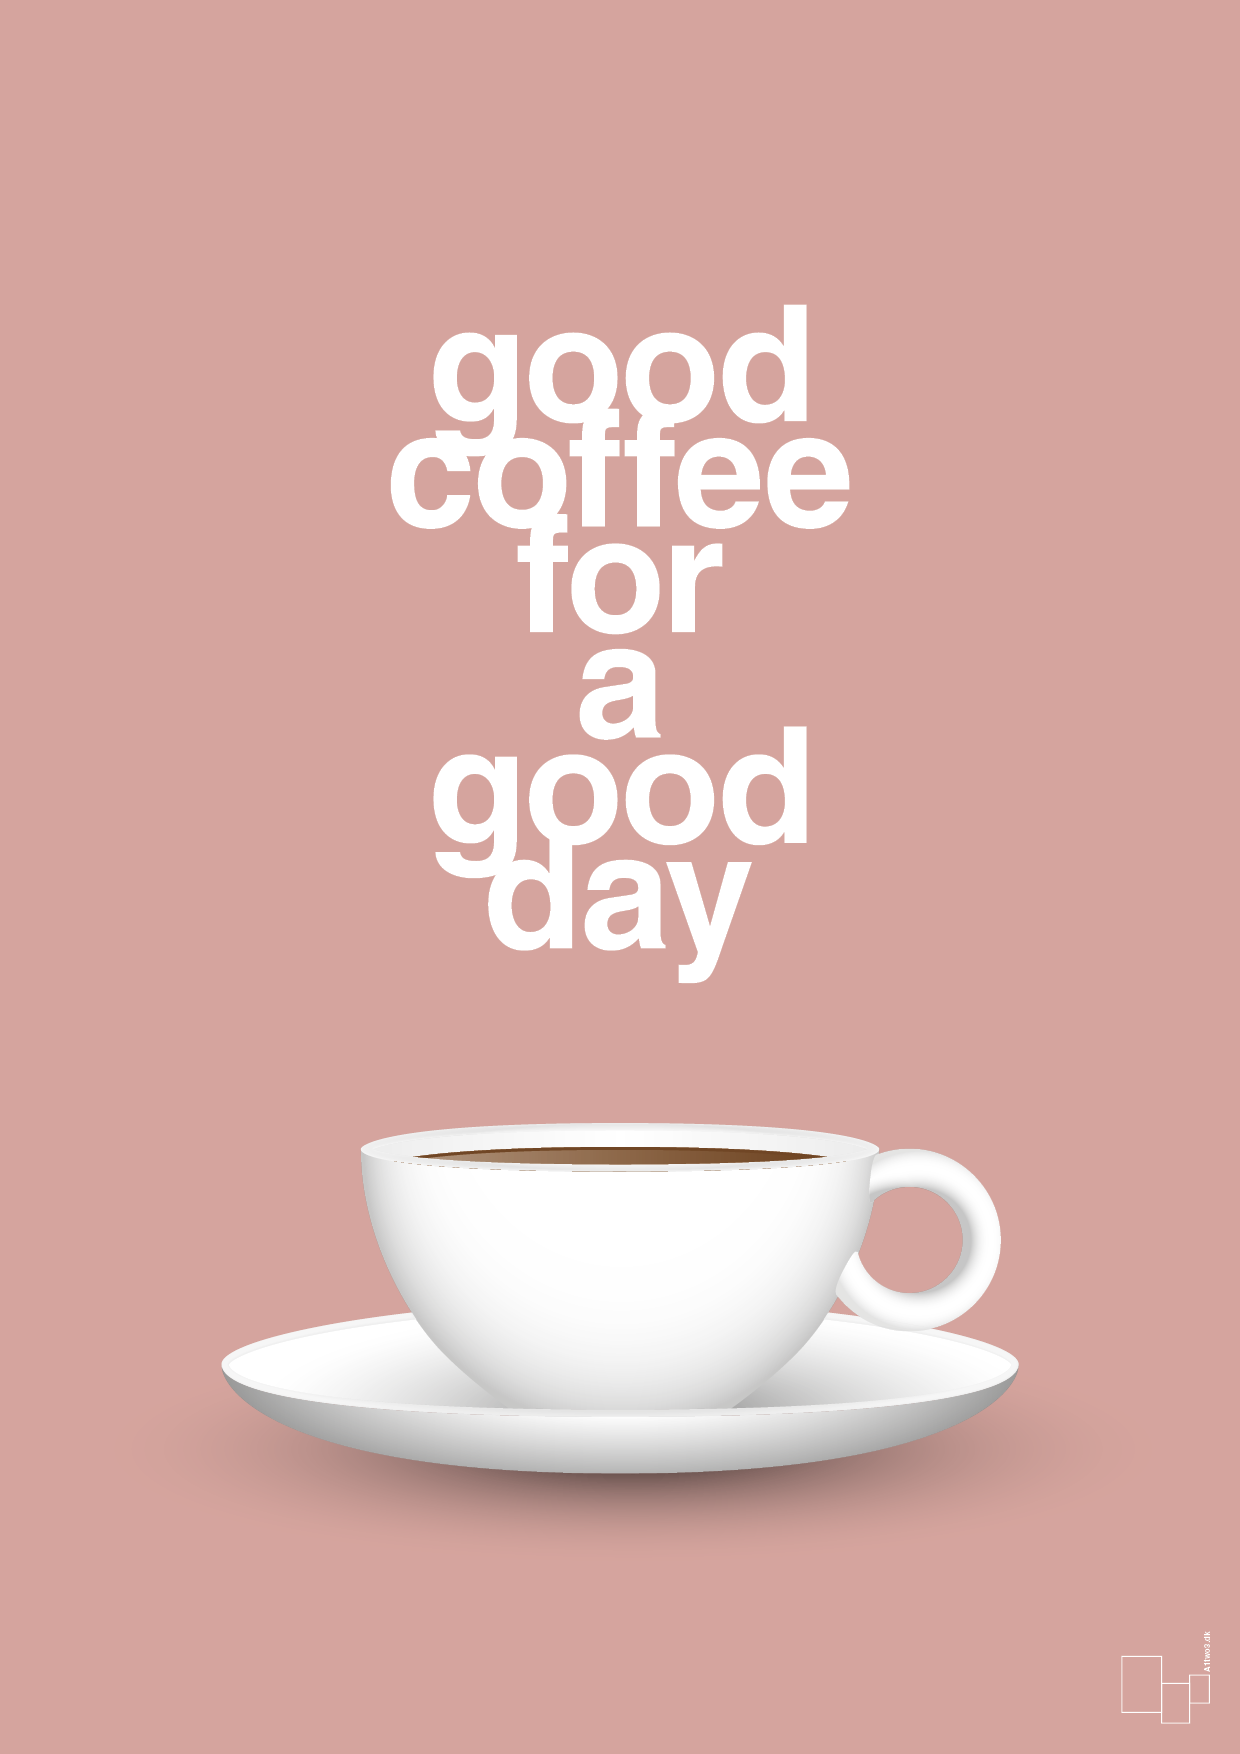 good coffee for a good day - Plakat med Mad & Drikke i Bubble Shell